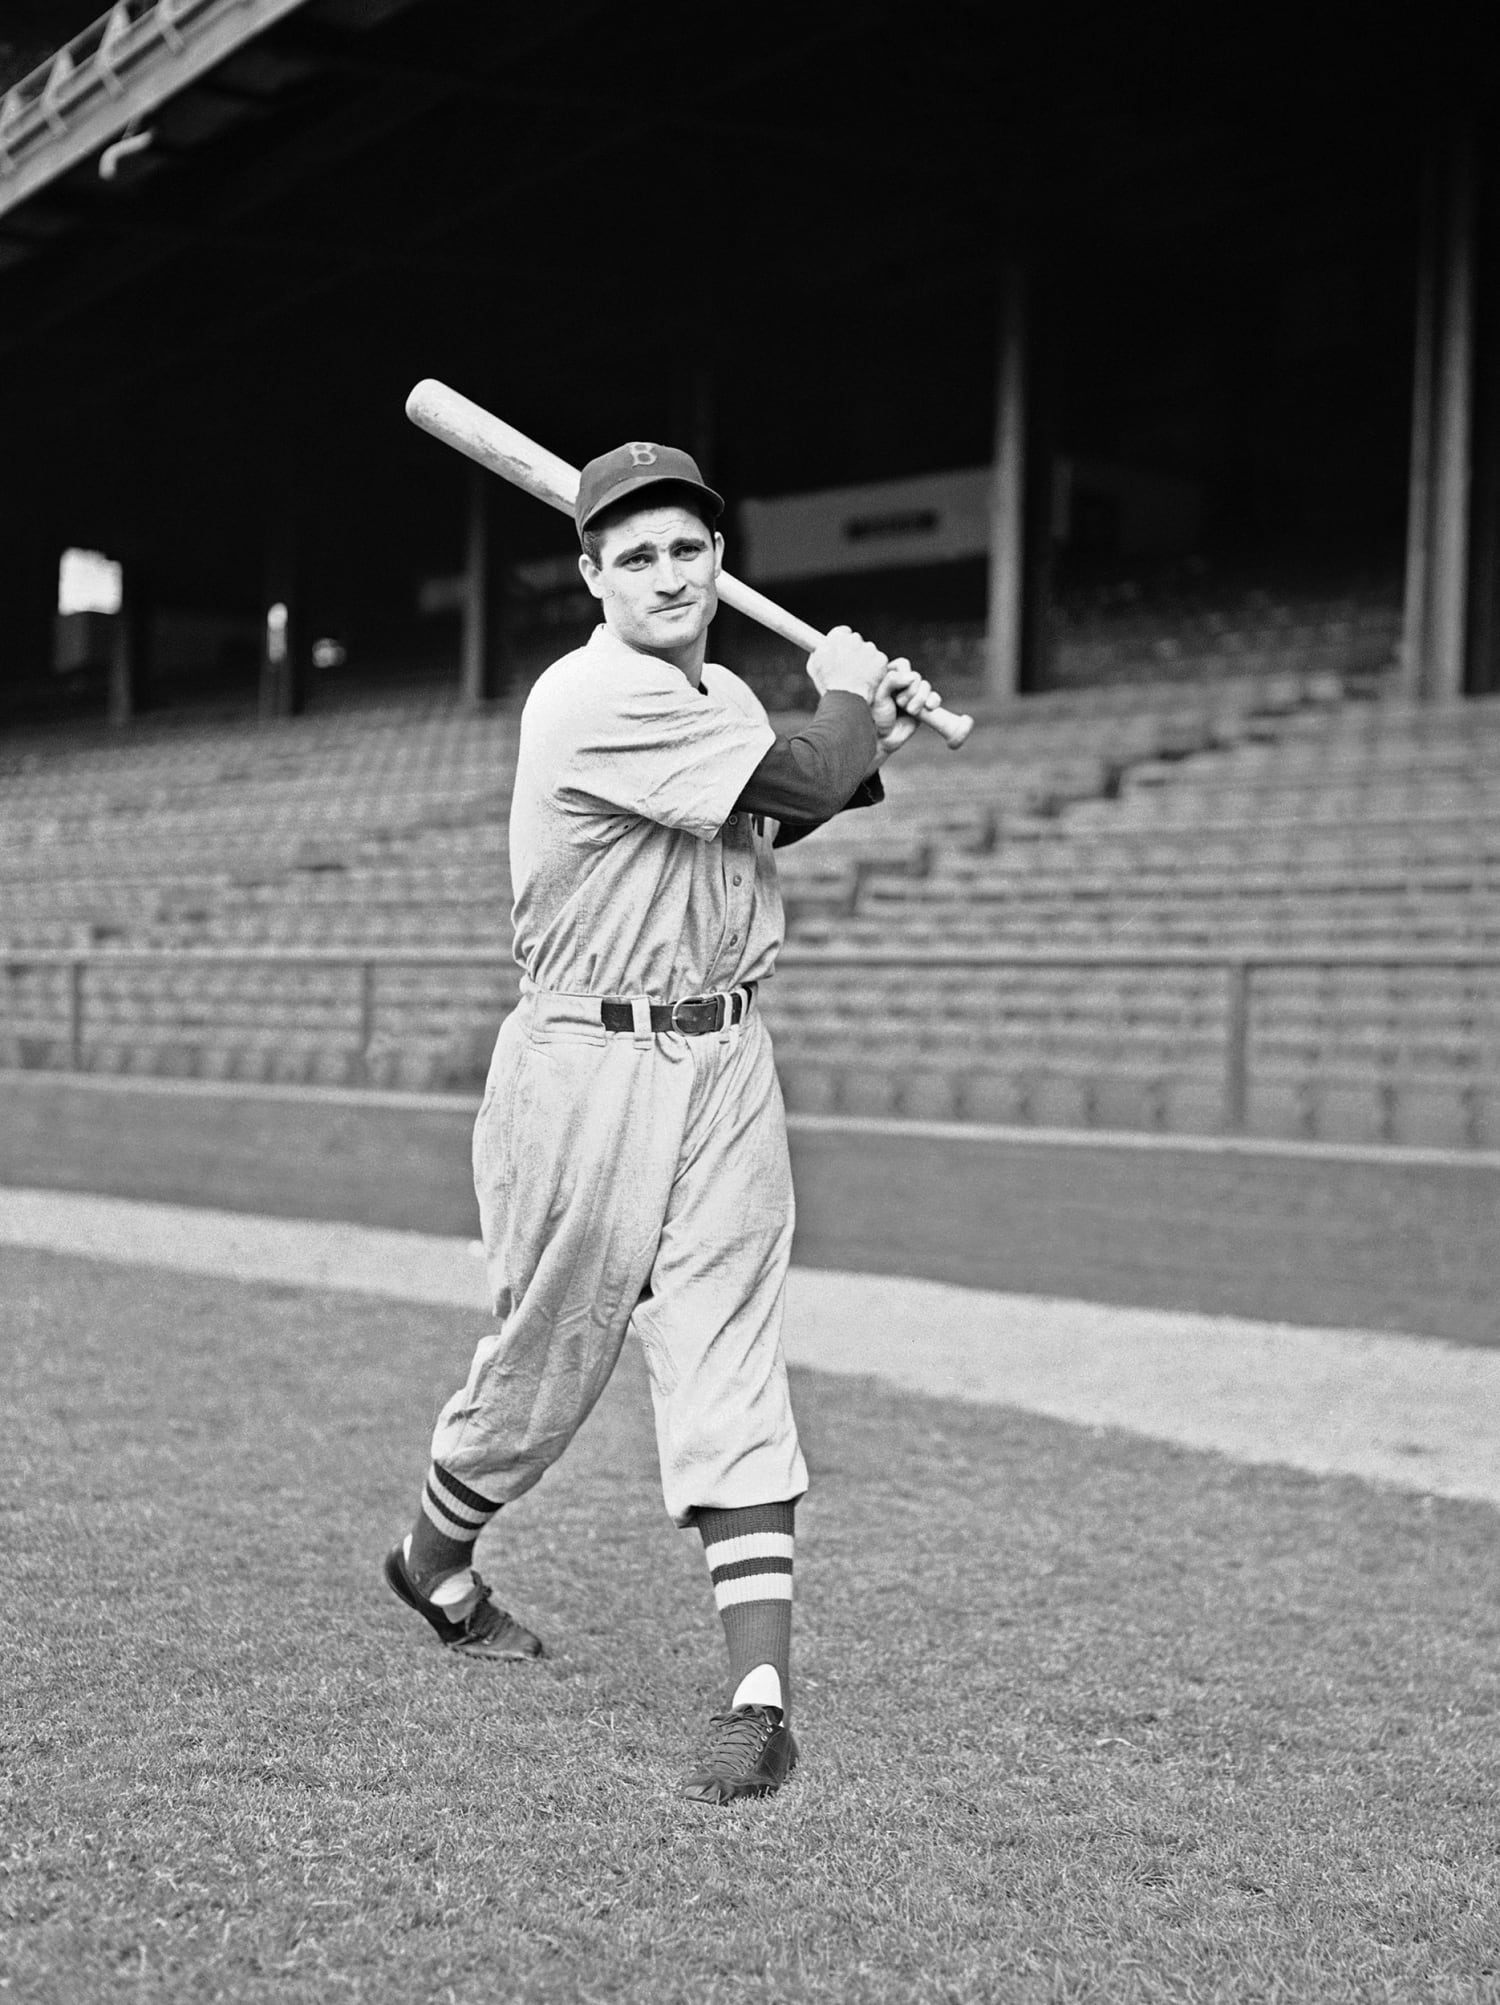 Bobby Doerr, Hall of Famer and Boston Red Sox Second Baseman, Dies at 99